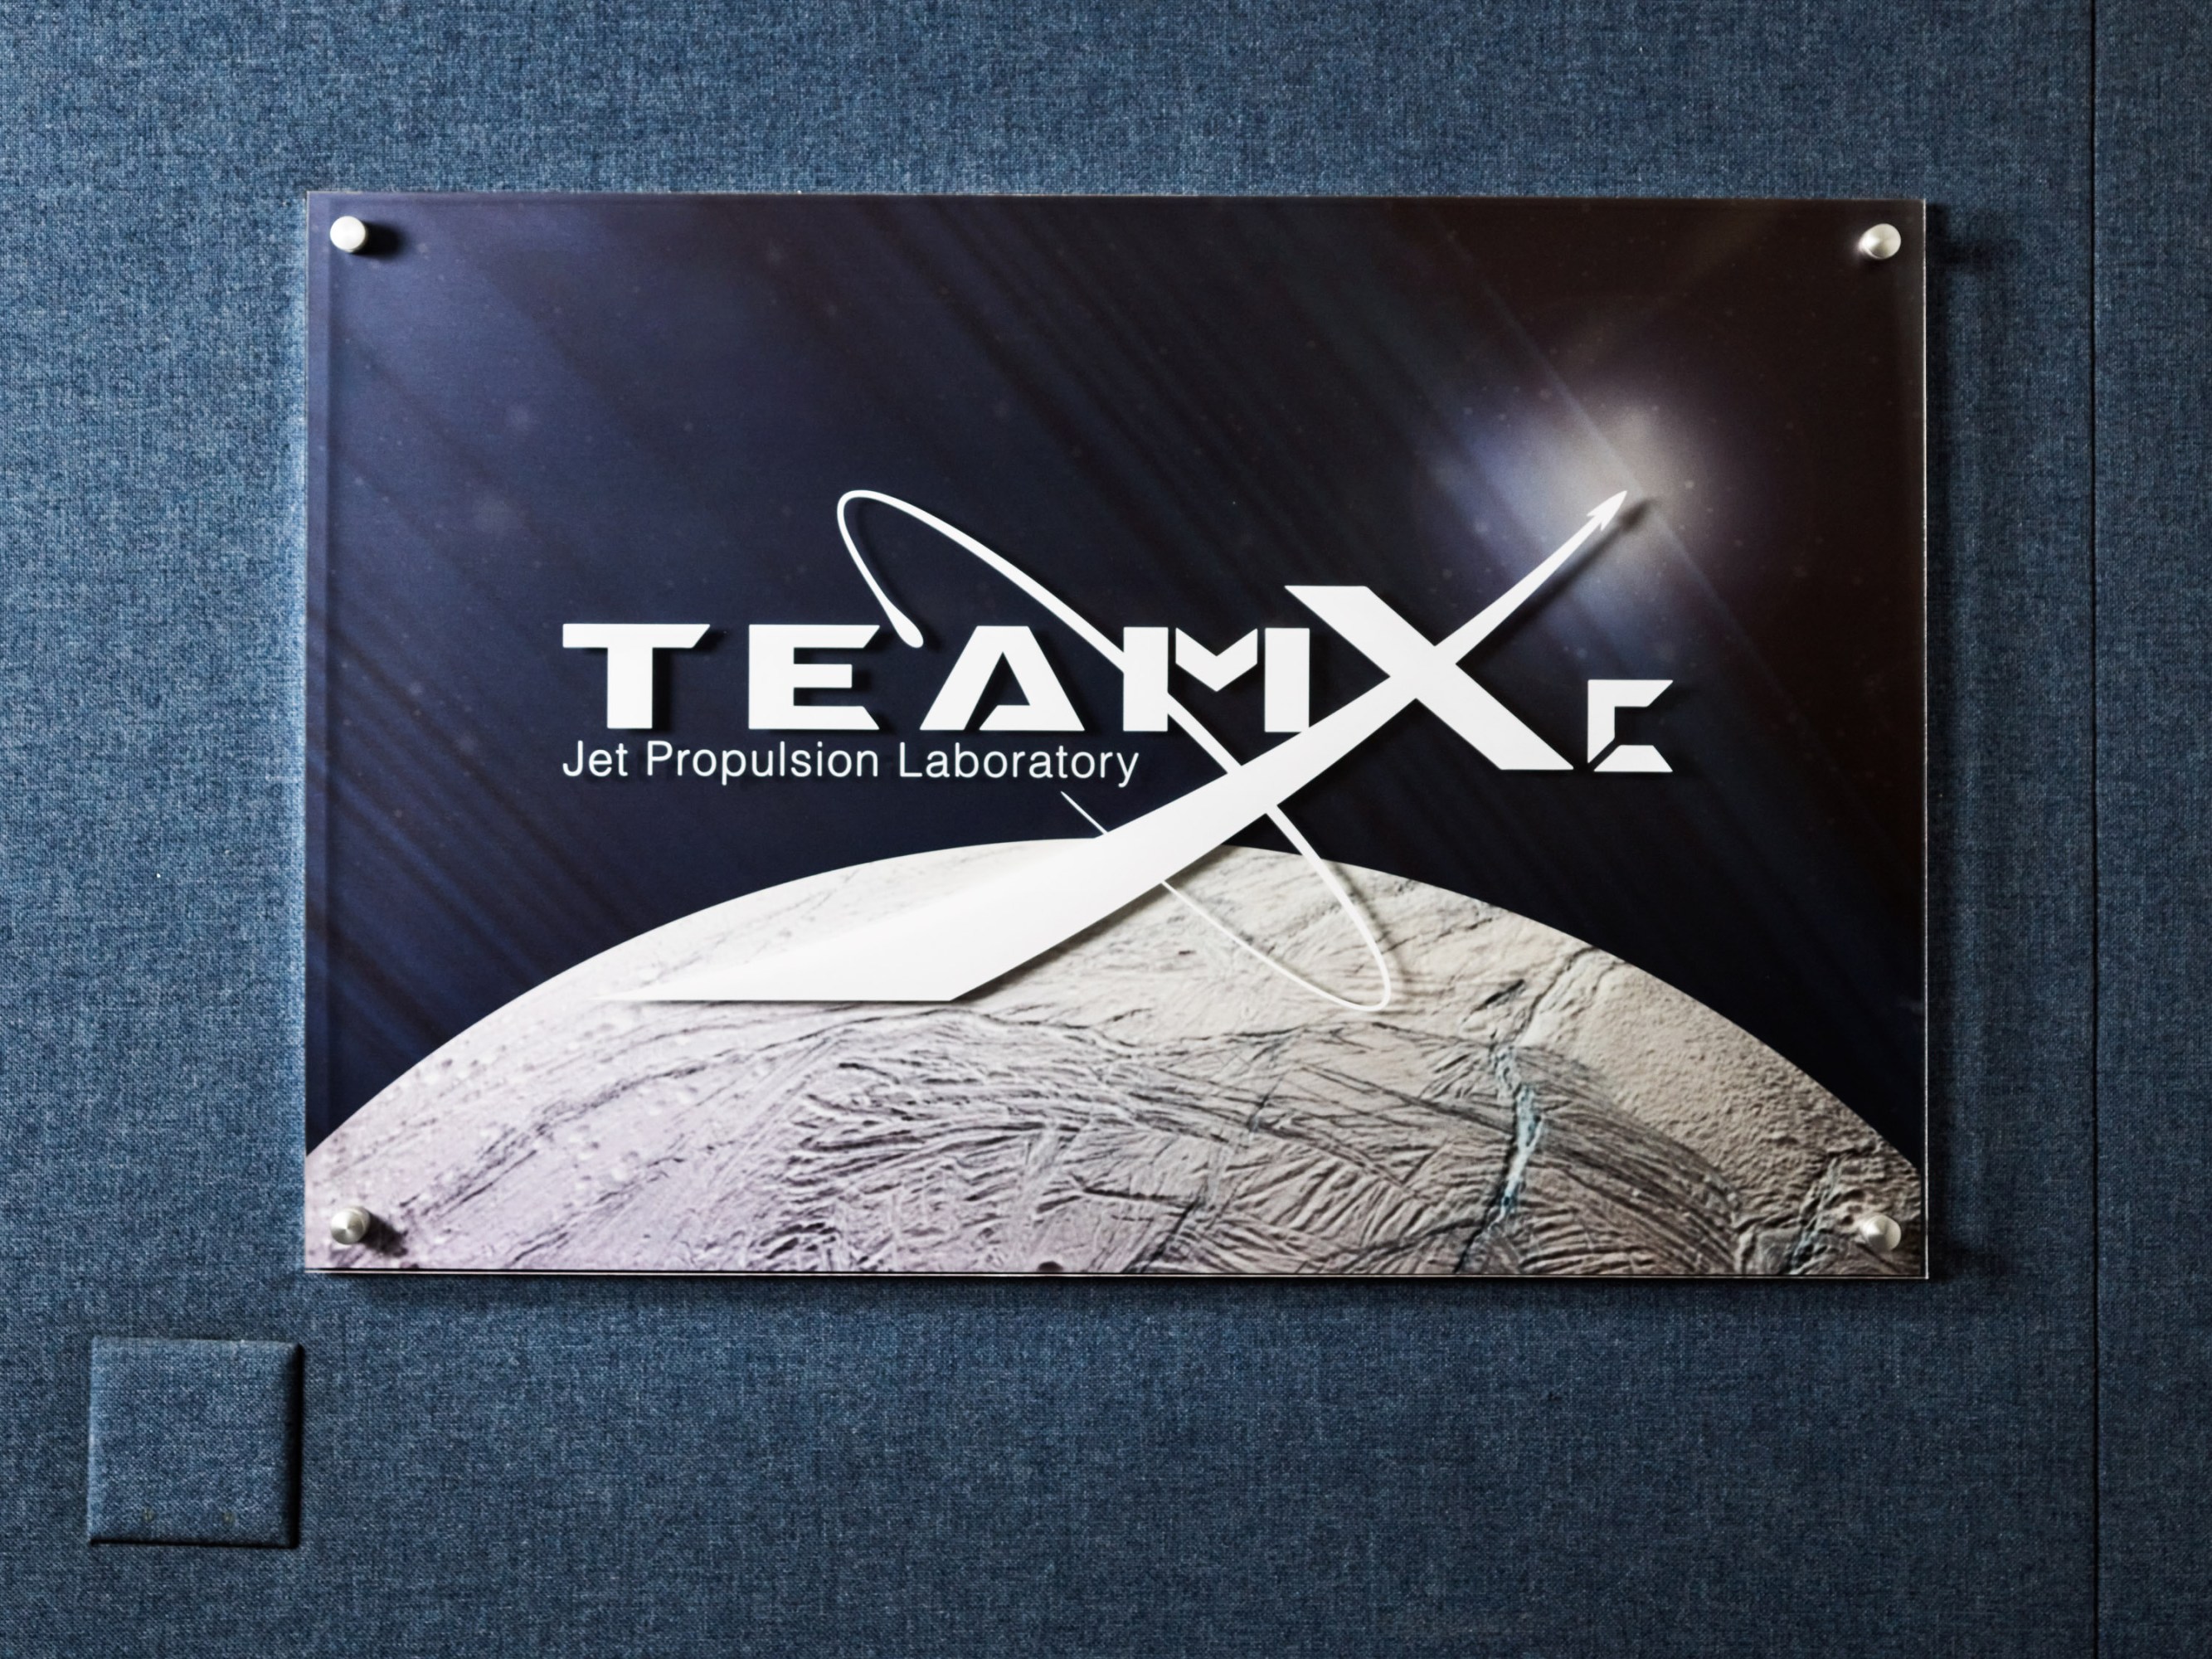 wall poster for Team X at JPL